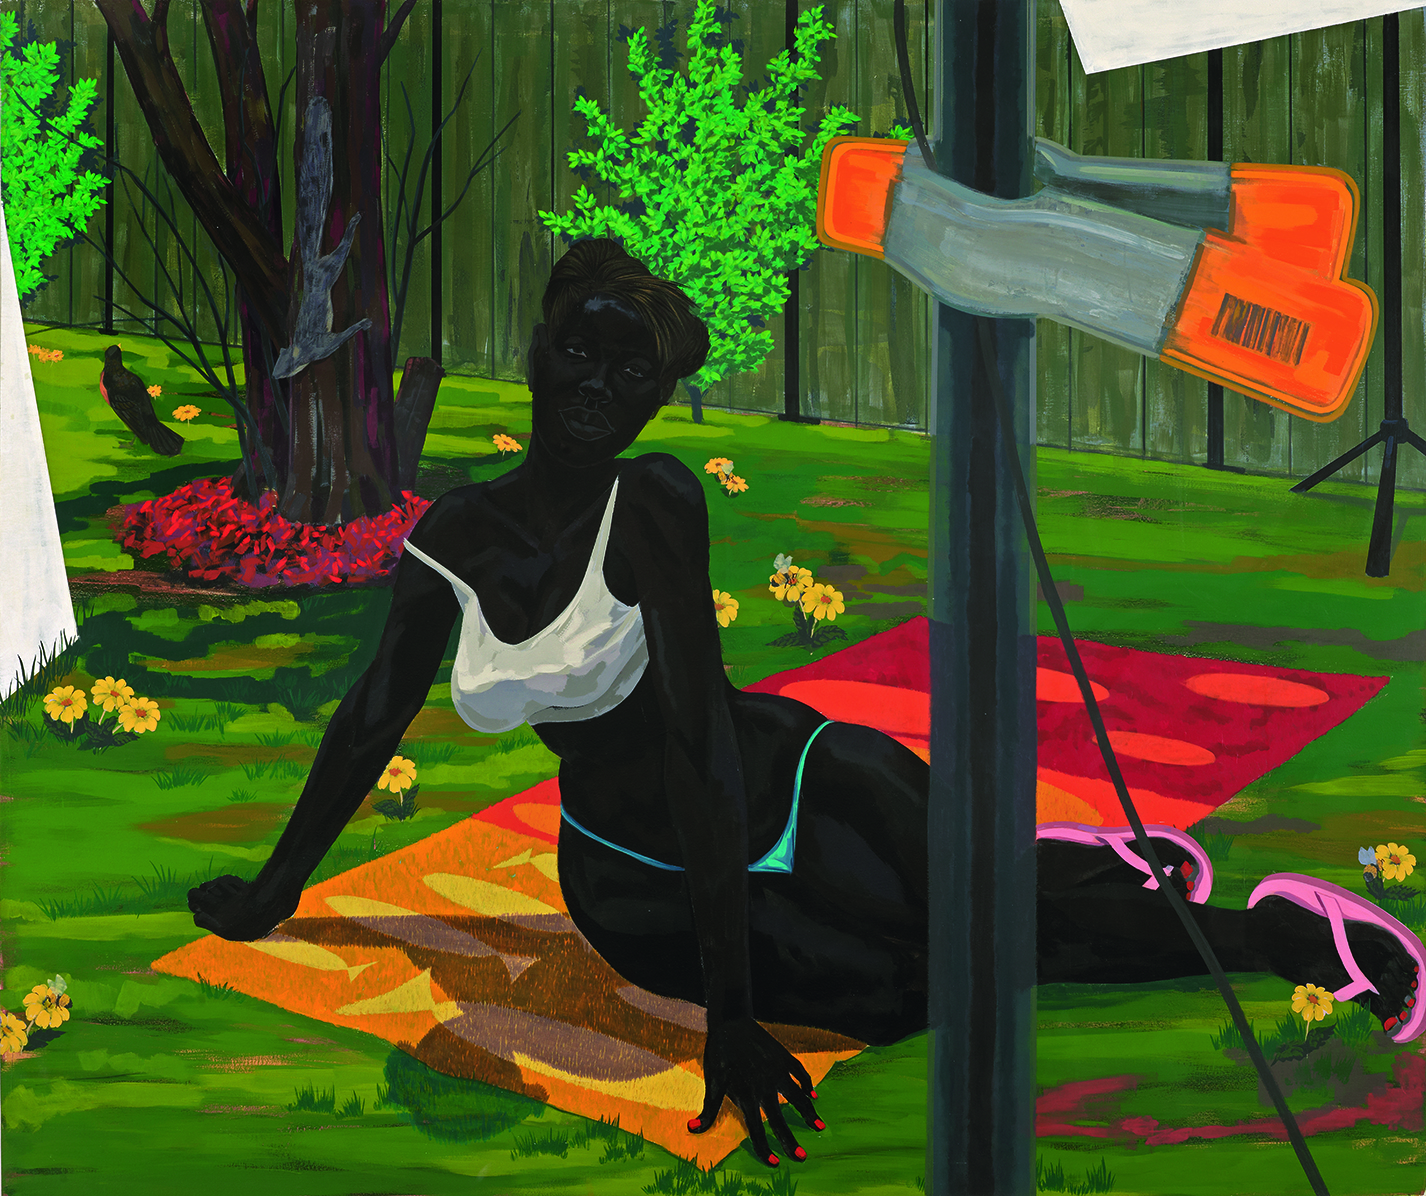 Untitled (Beach Towel) 2014 by Kerry James Marshall